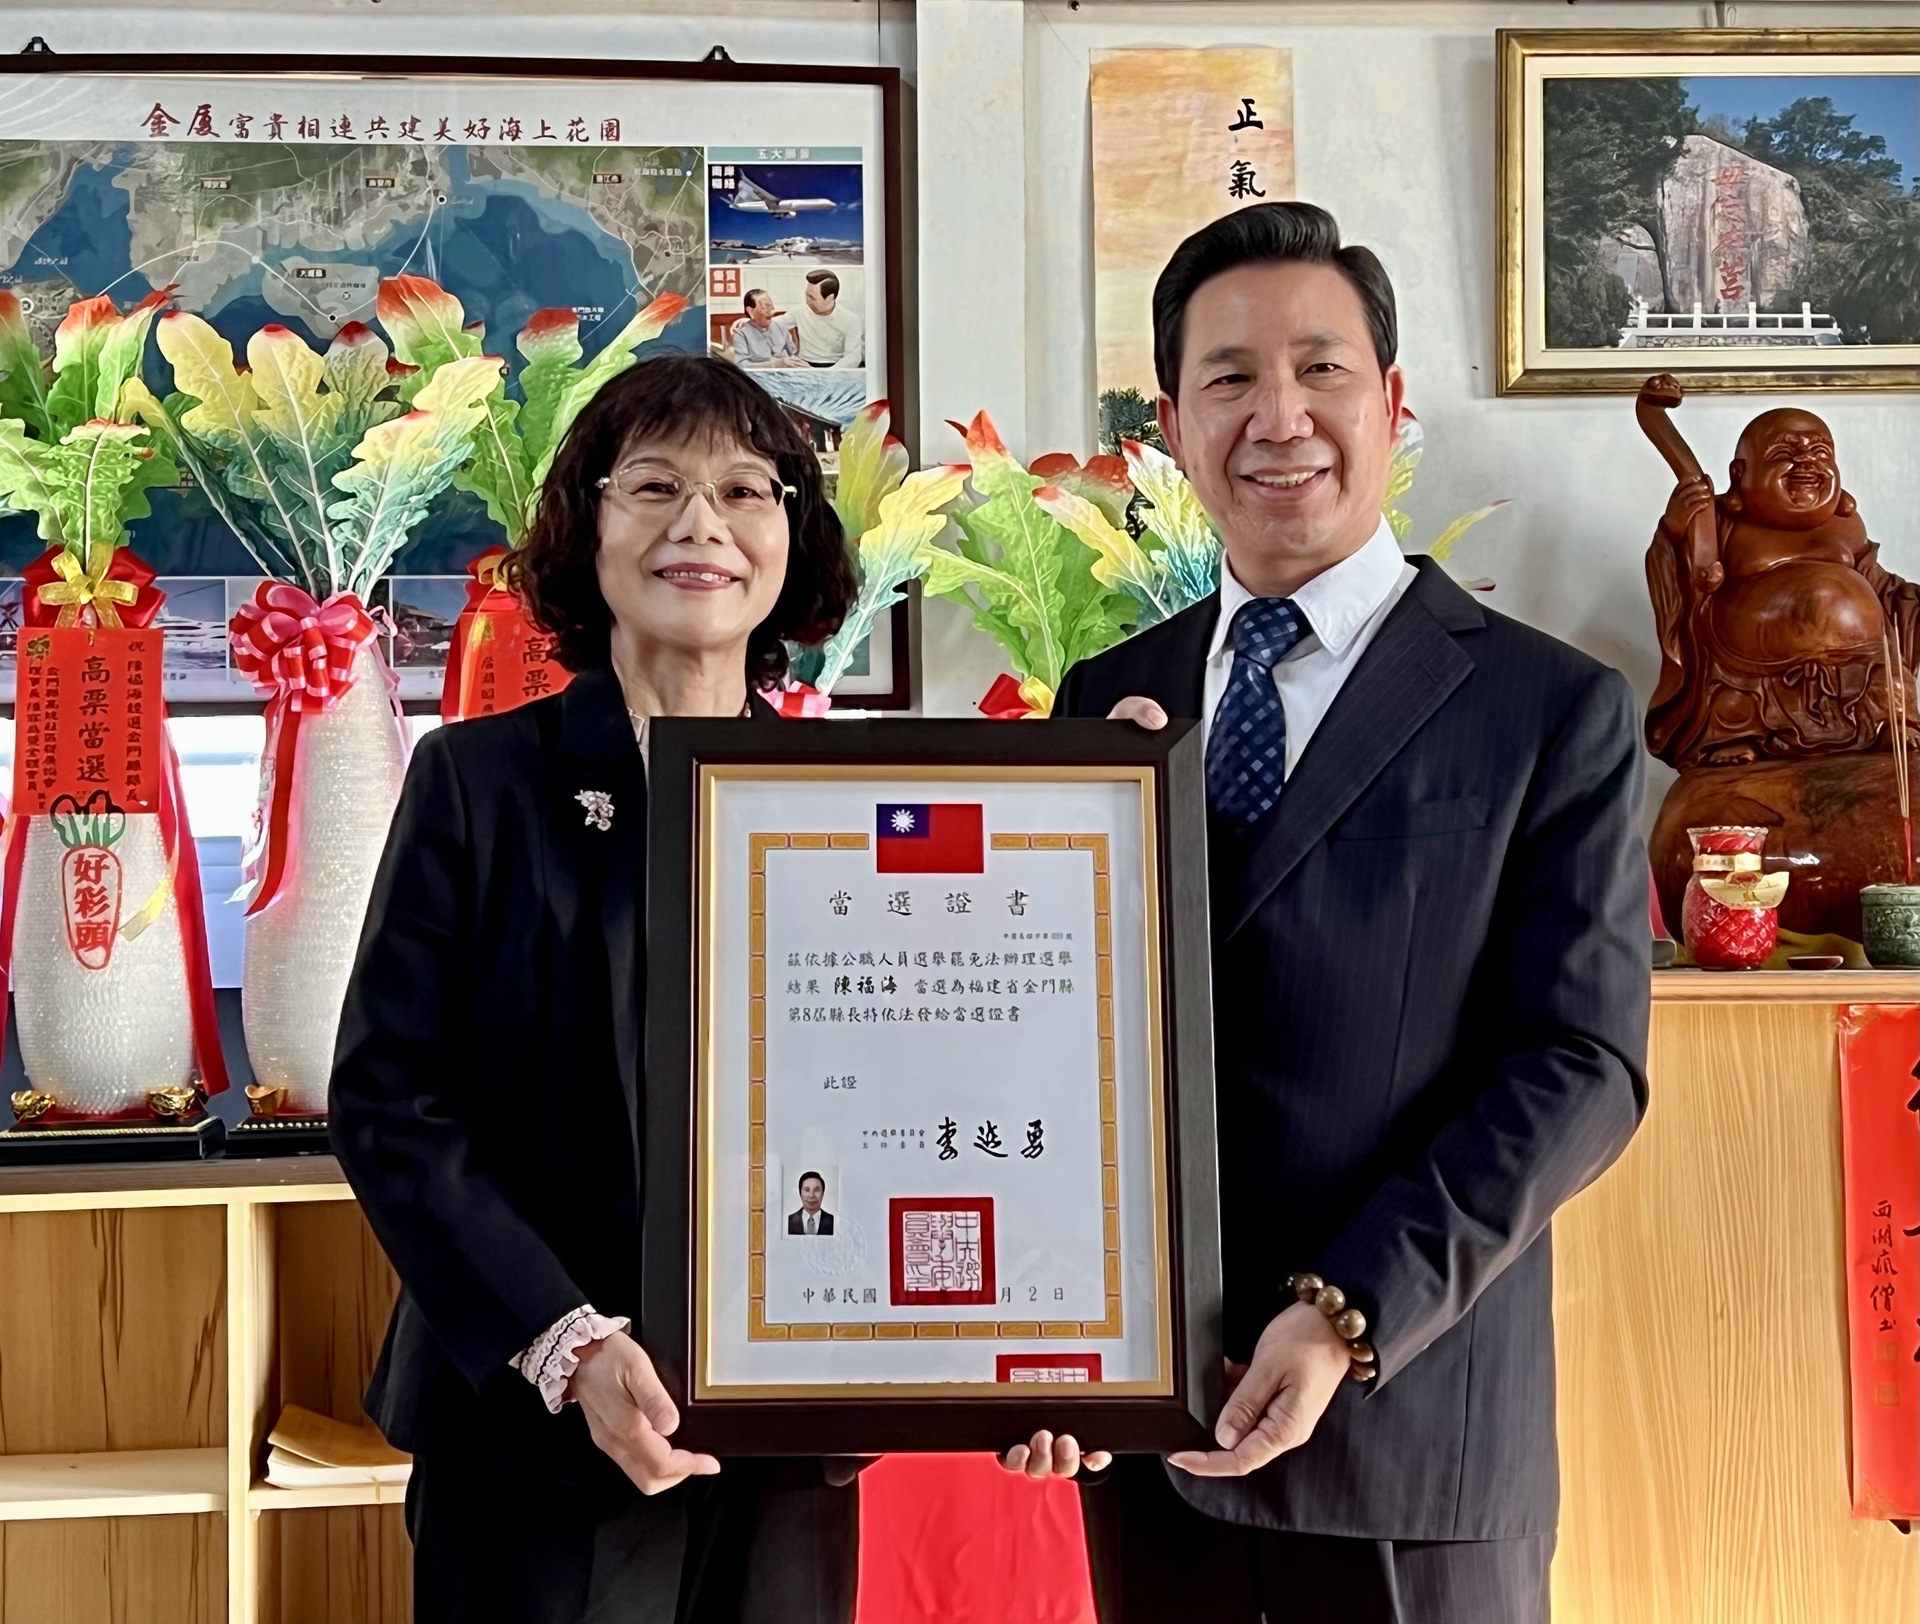 The president of NUK issued a certificate of election to Kinmen County Magistrate as a member of CEC